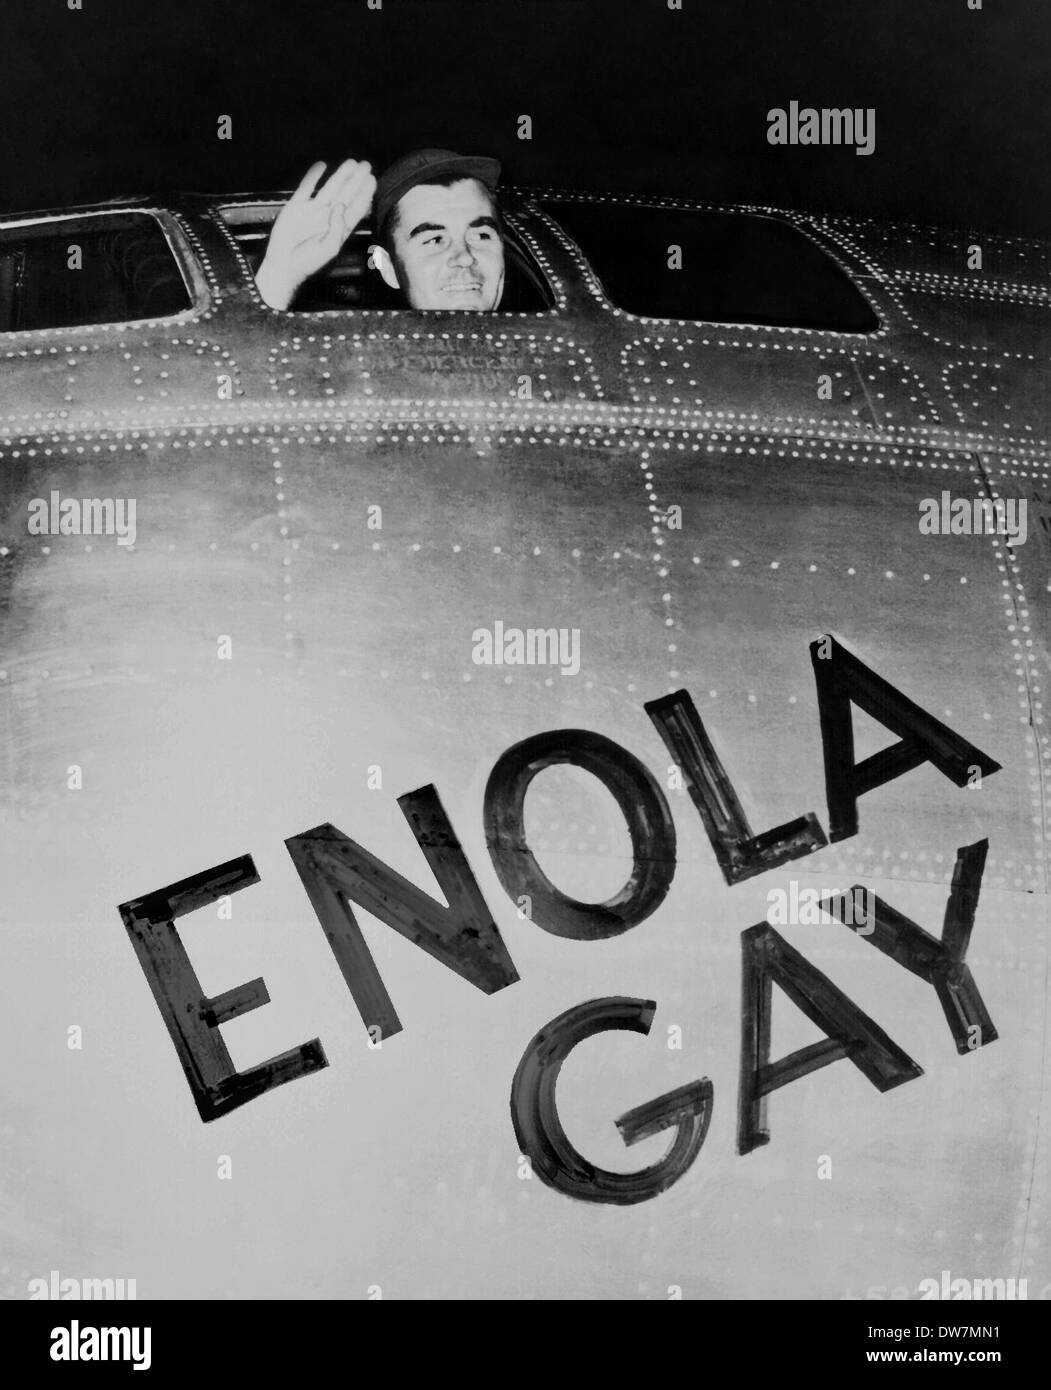 US Air Force Col. Paul W. Tibbets, Jr., pilot of the ENOLA GAY waves from his cockpit of his B-29 Superfortress before takeoff to drop the atomic bomb on Hiroshima, Japan August 6, 1945 from North Filed, Tinian, Mariana Islands. Stock Photo